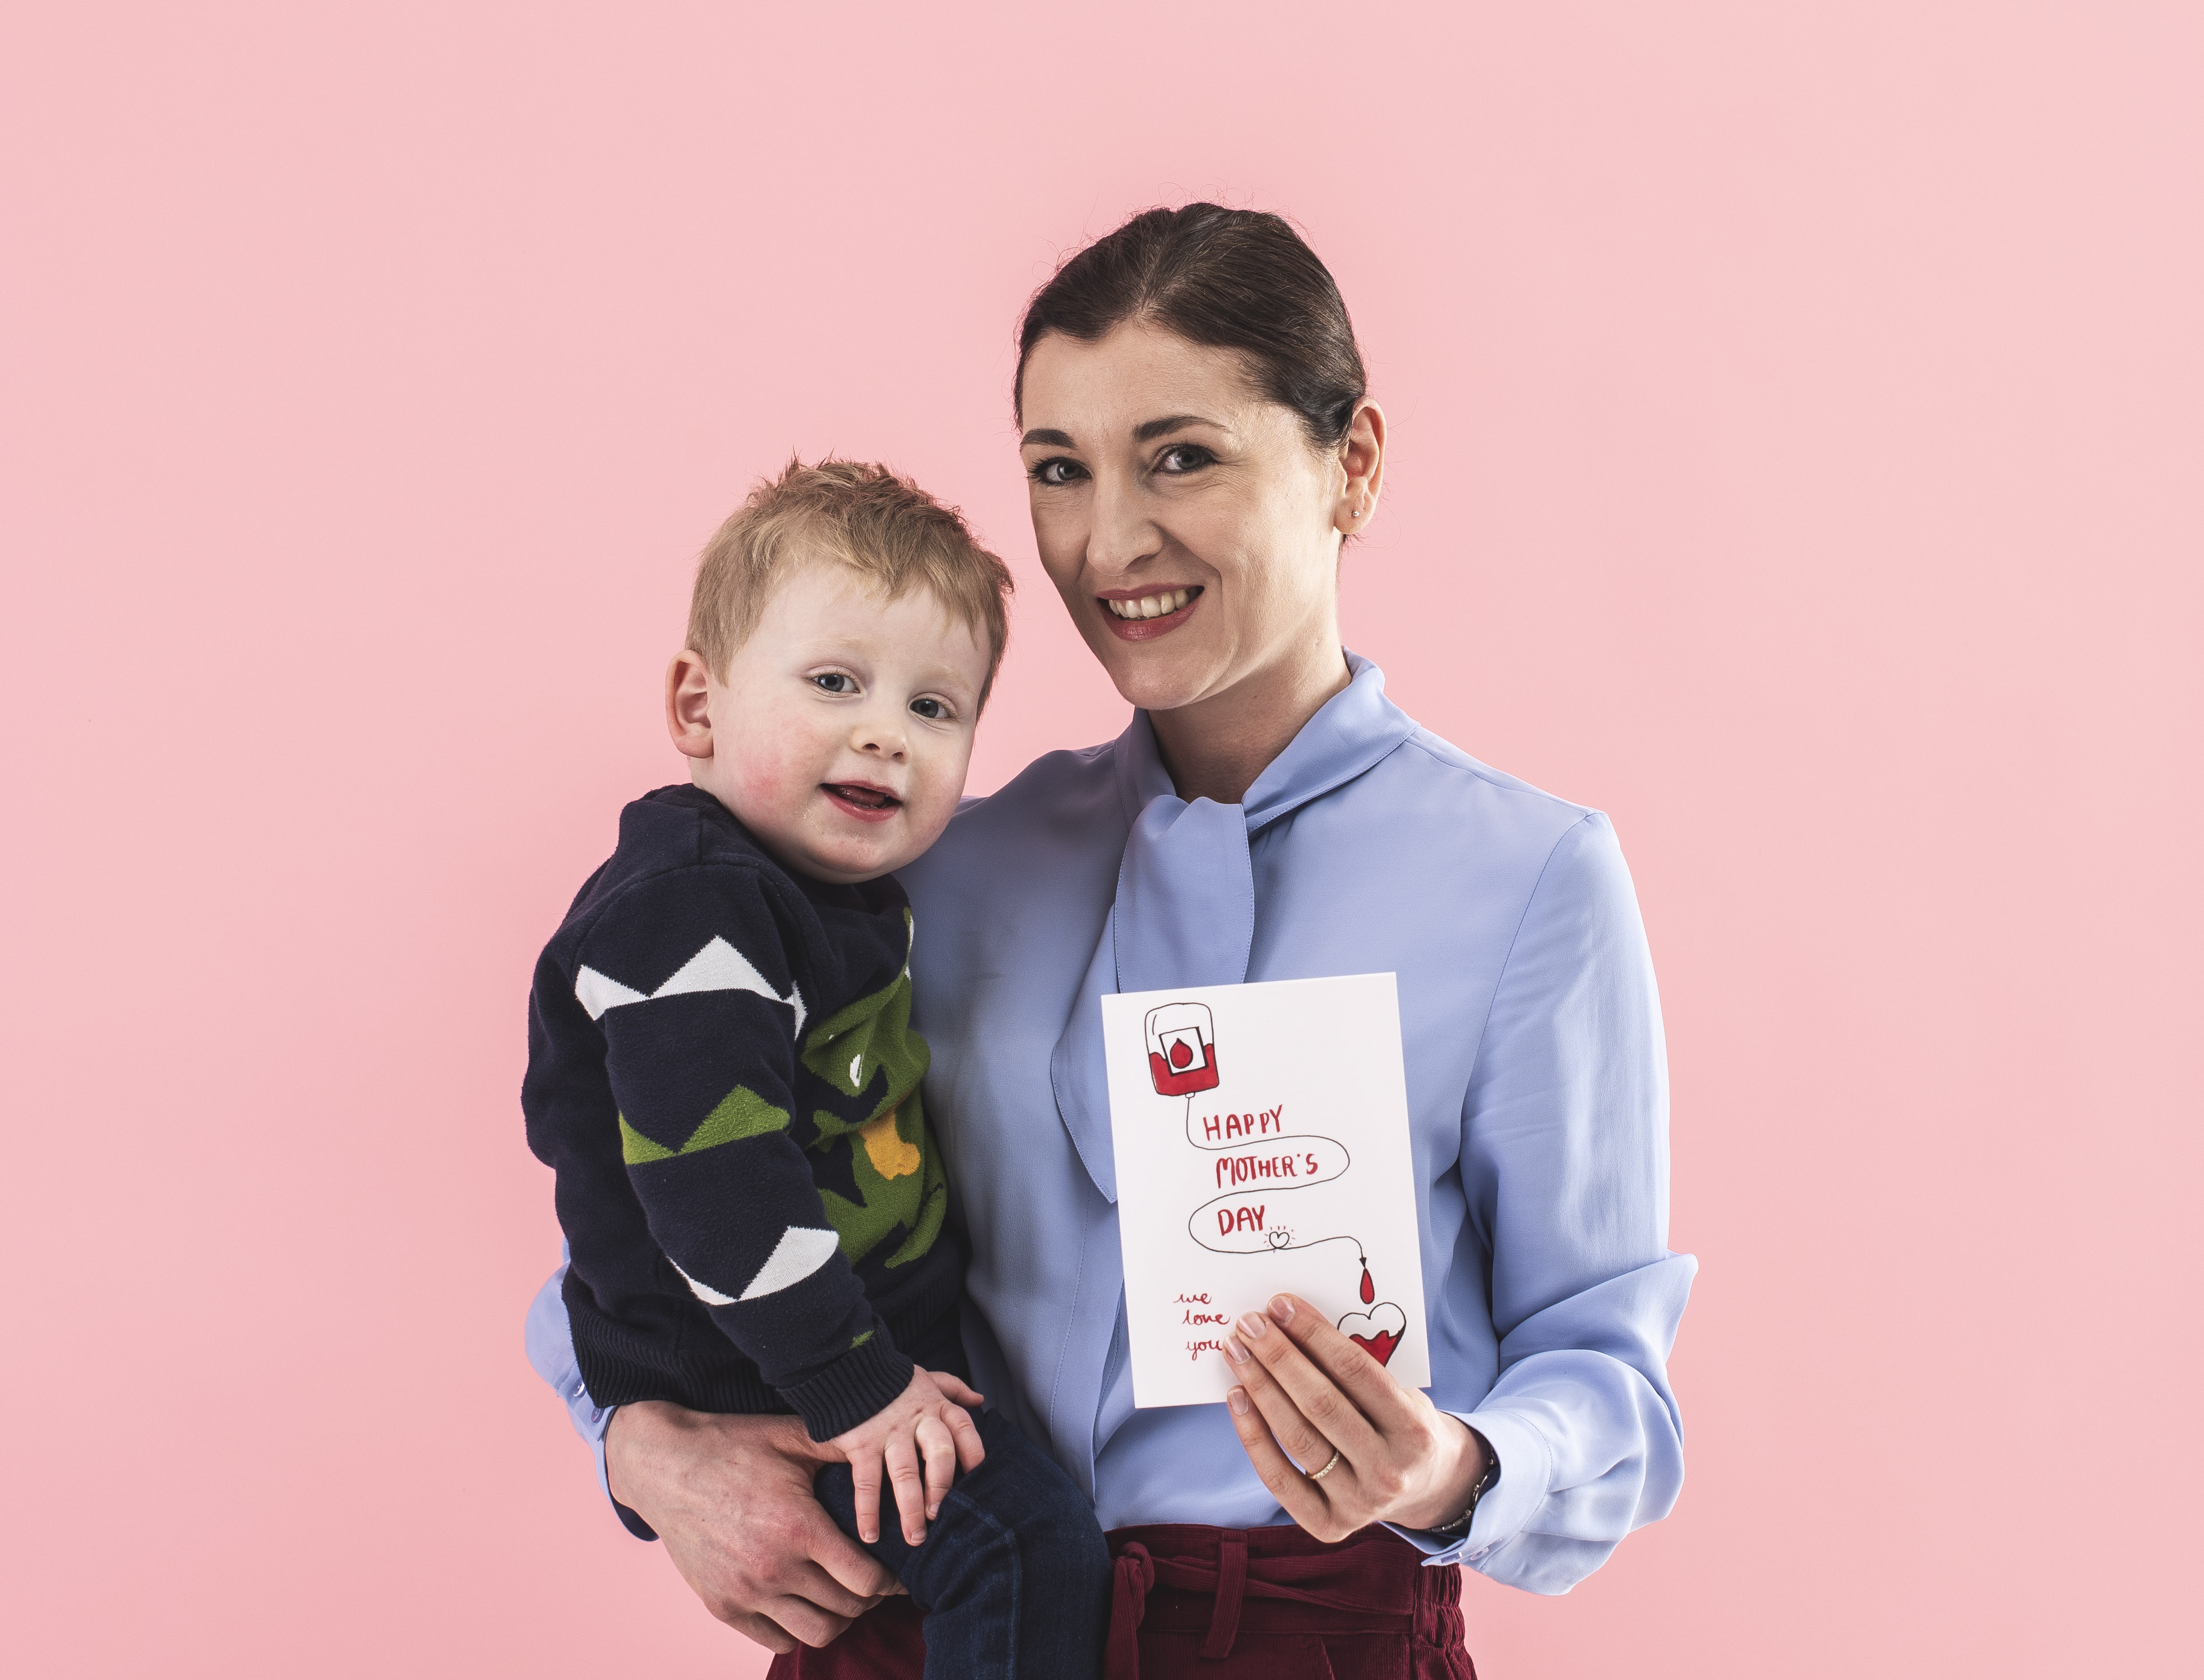 Kirsty holds a card and her toddler son